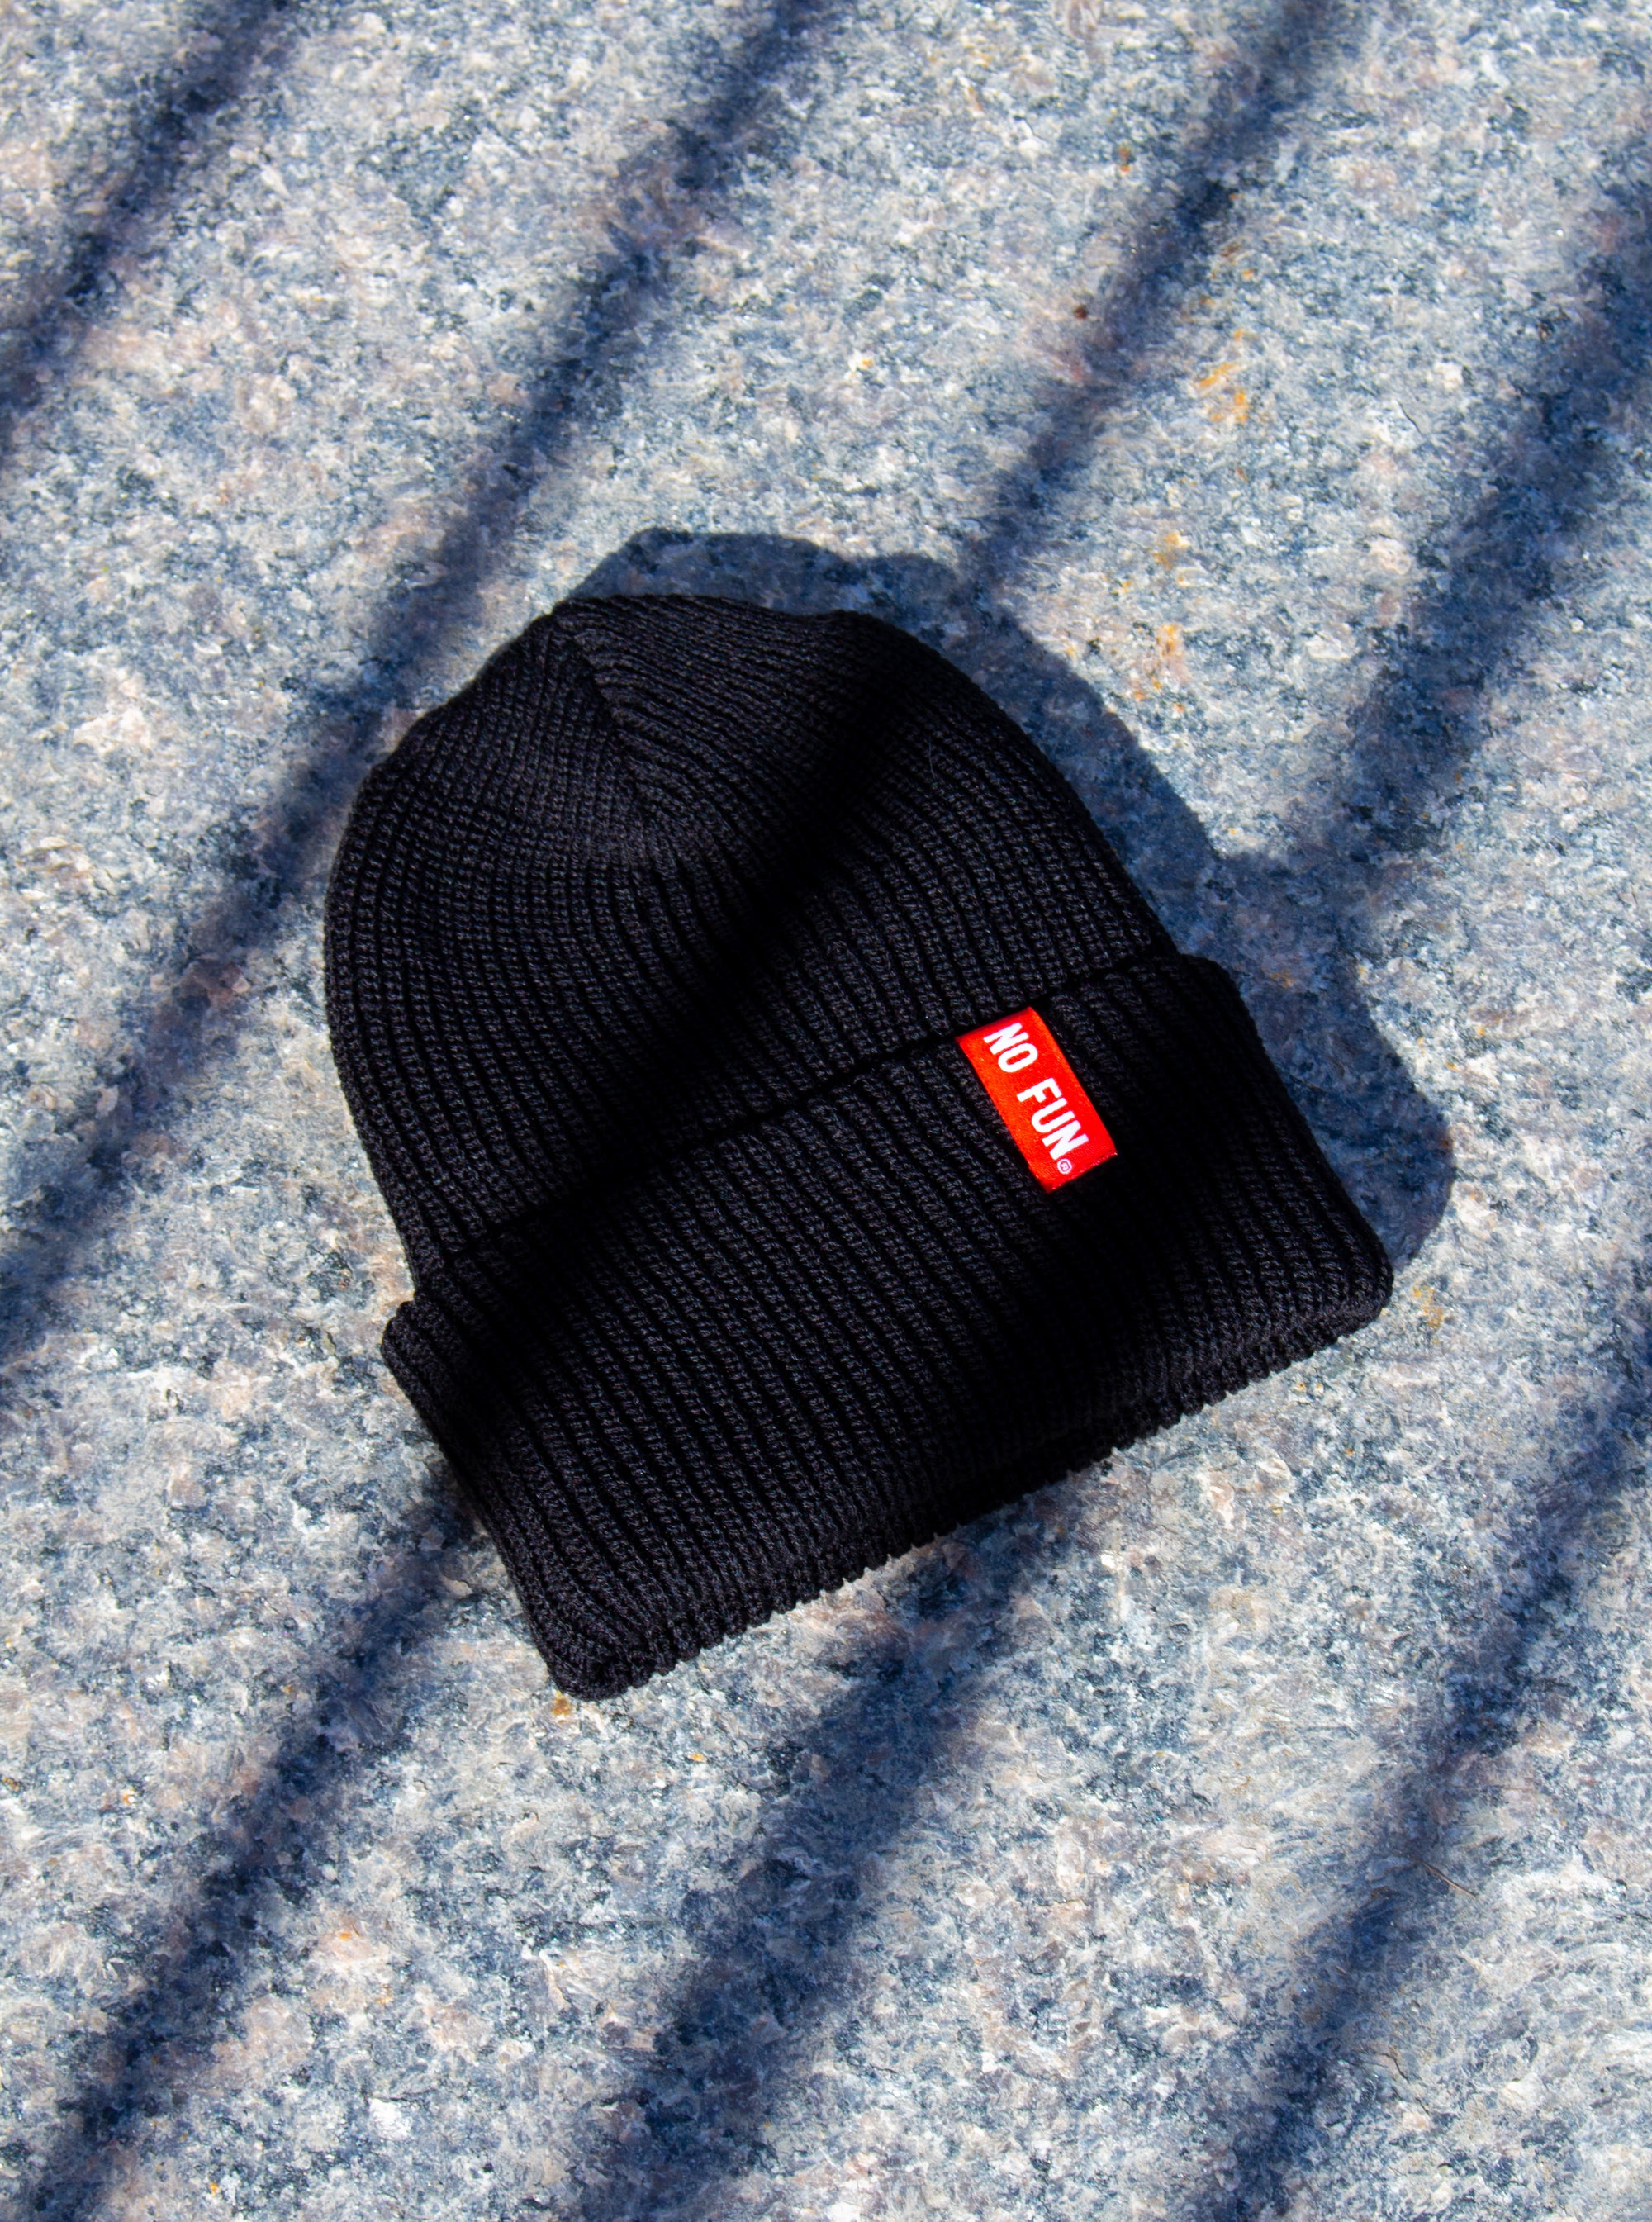 Photo of the "No Fun®" Ribbed beanie photographed on a slab of concrete, with diagonal shadows being cast upon the product.  Beanie is Navy Blue, and features a small, red, woven label that folds over the cuff. The text on the red label says "No Fun®" in white.